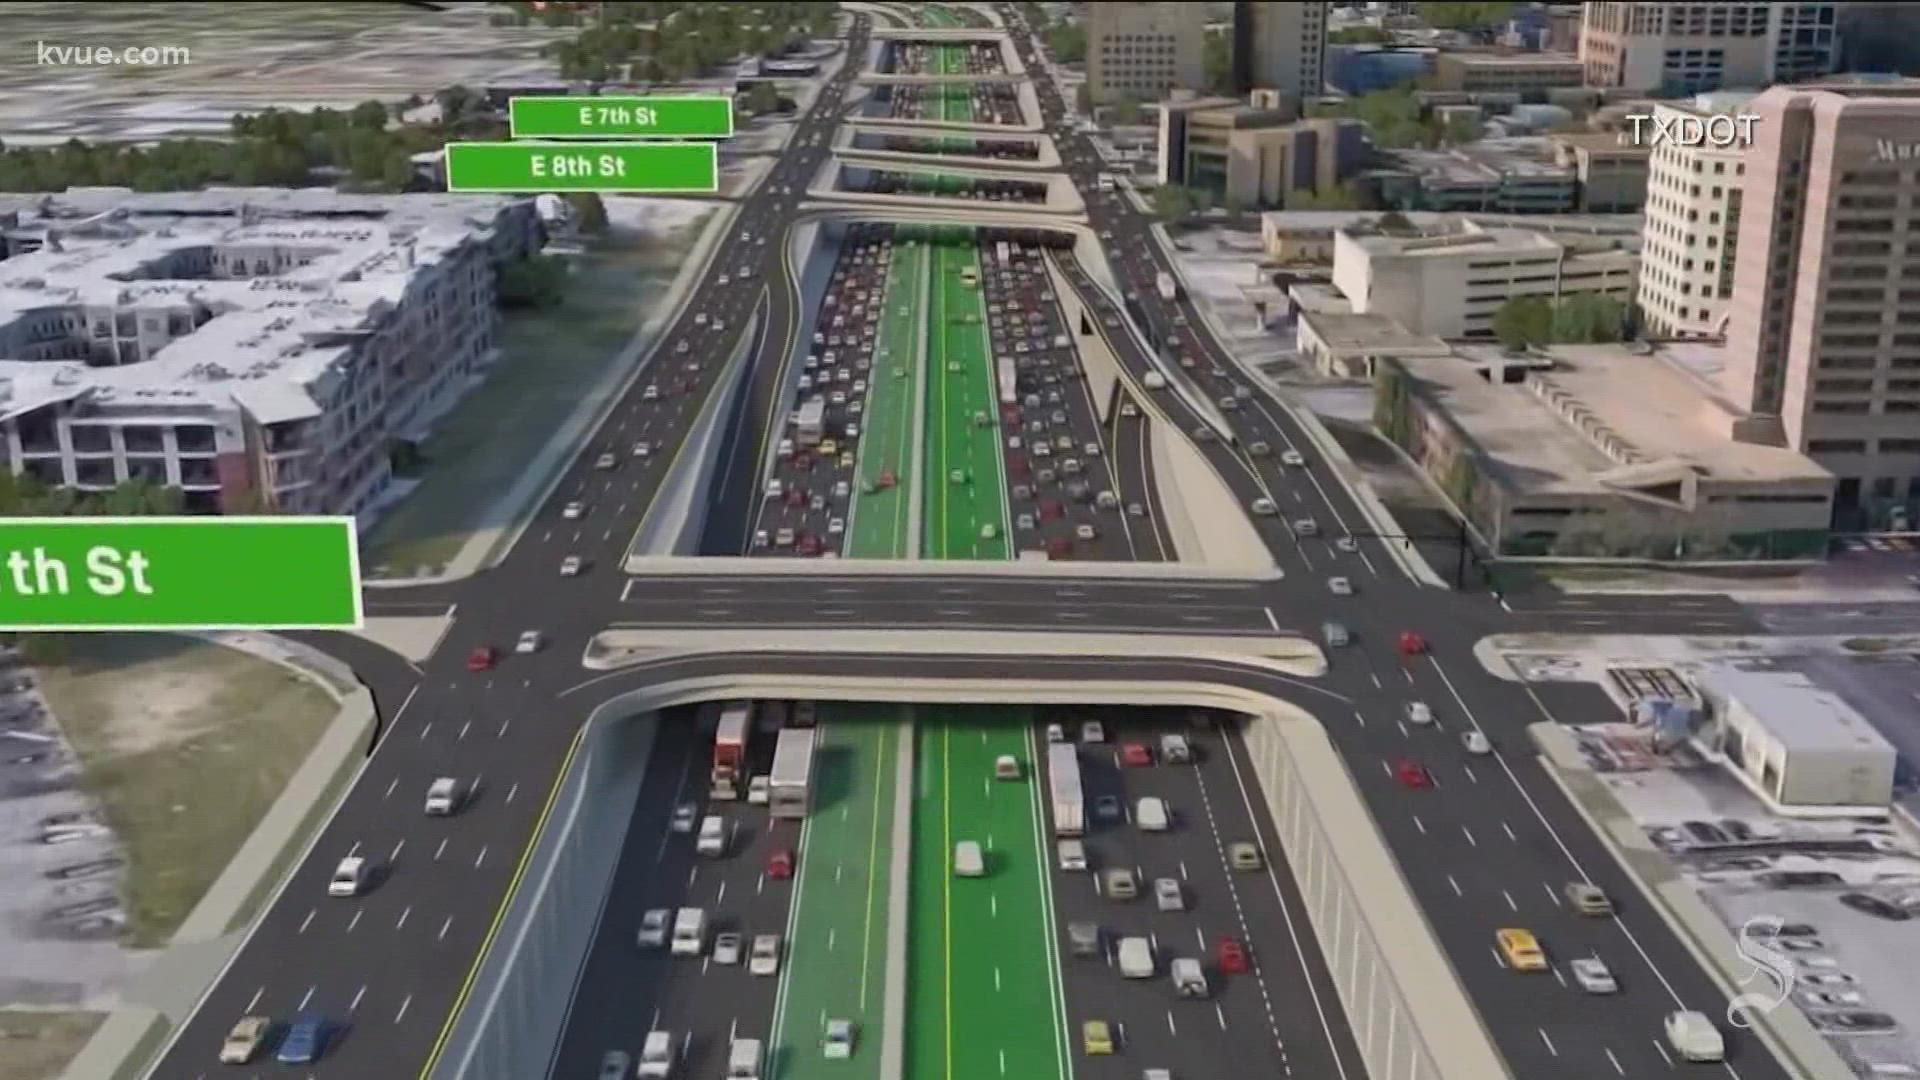 Tensions are rising over the State's plan to overhaul Interstate 35 through Central Austin.